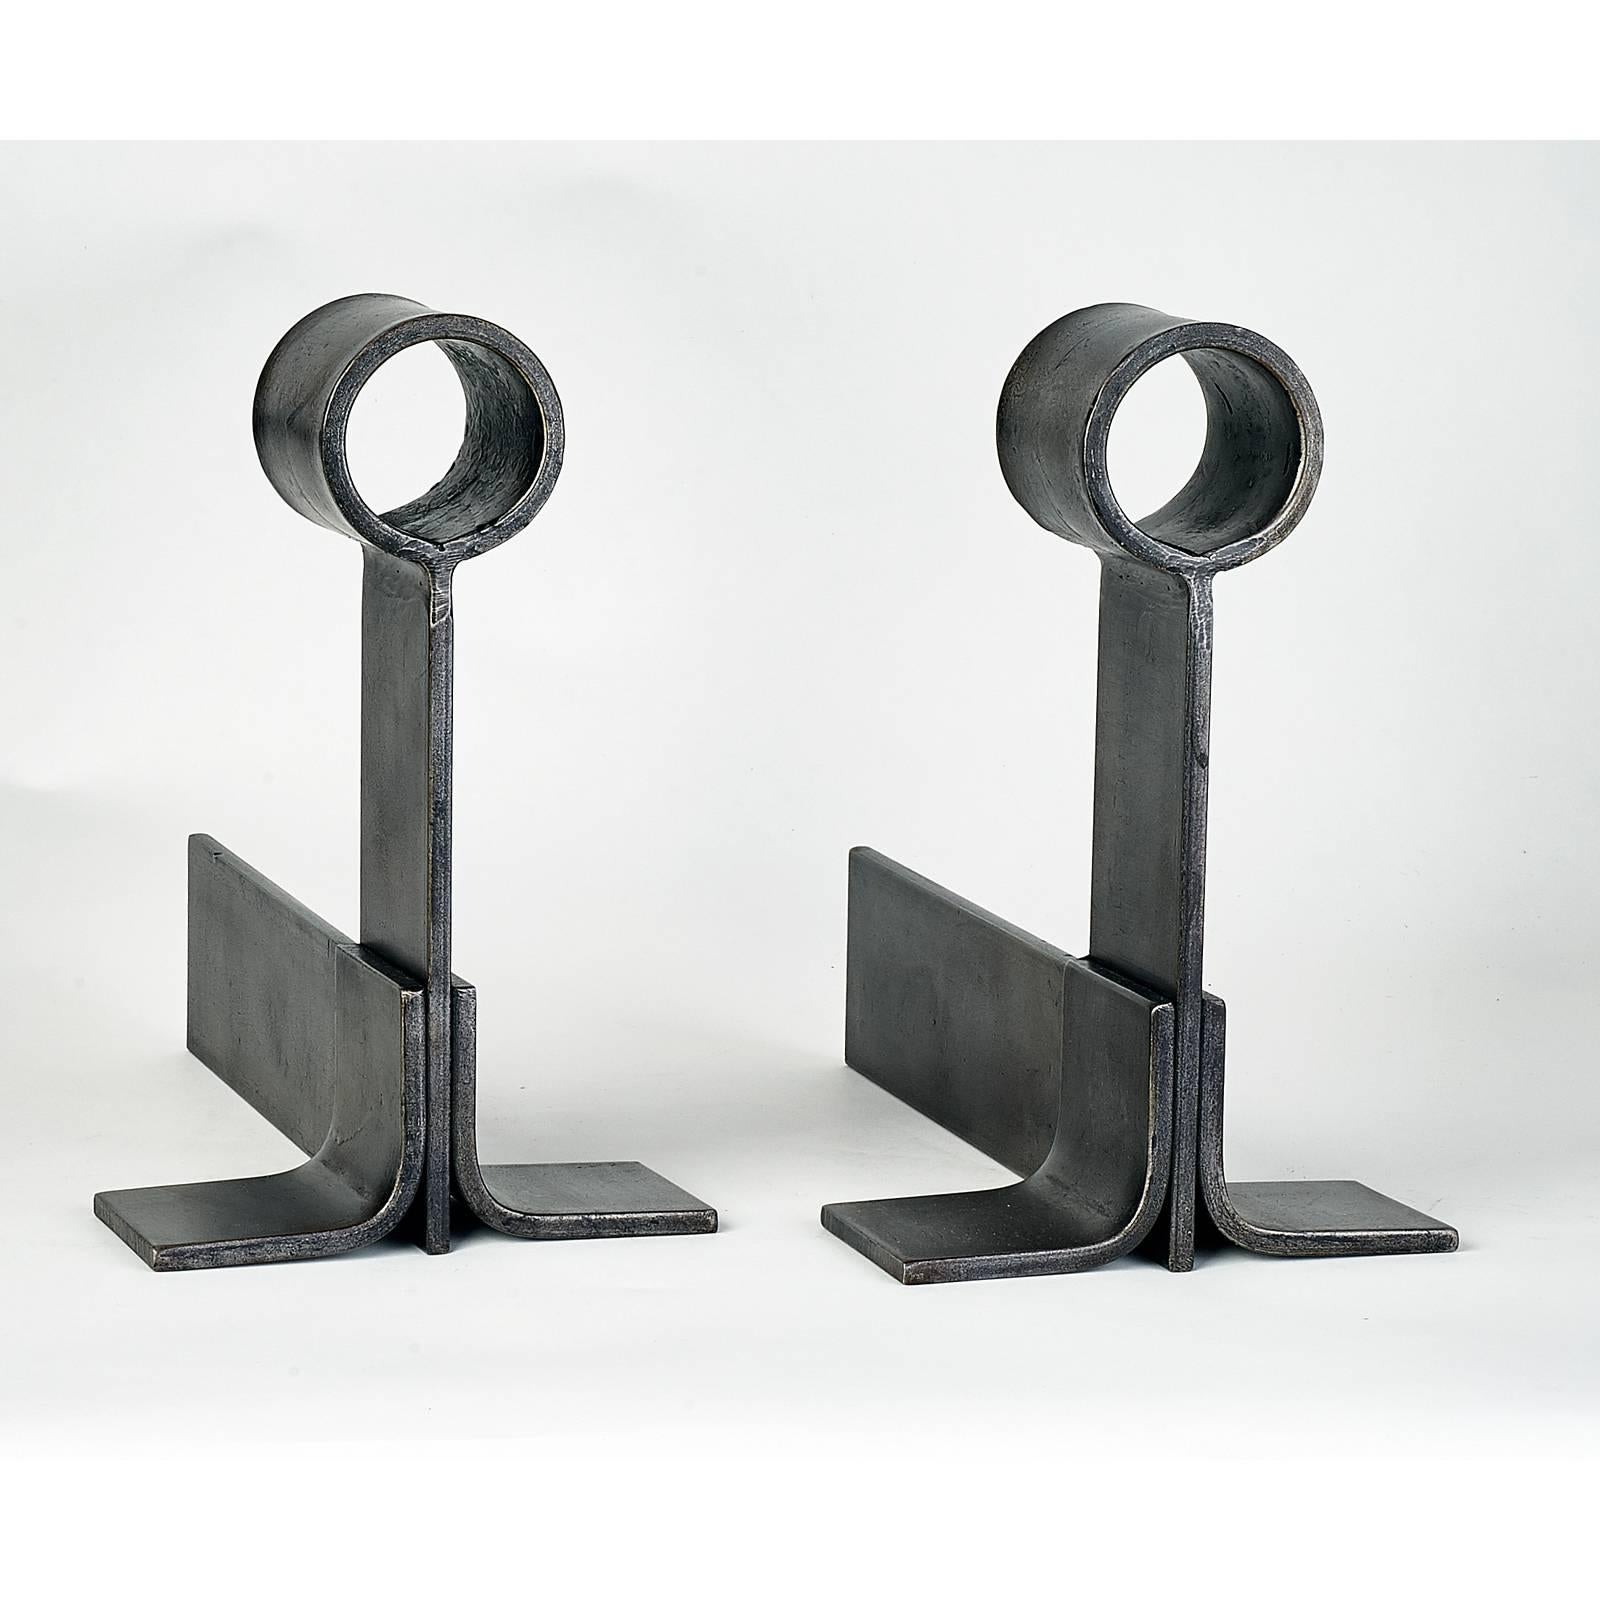 France, 1950s
Pair of modernist andirons with circular motif in wrought iron
Dimensions: 7.5 W x 13 D x 12 H.

